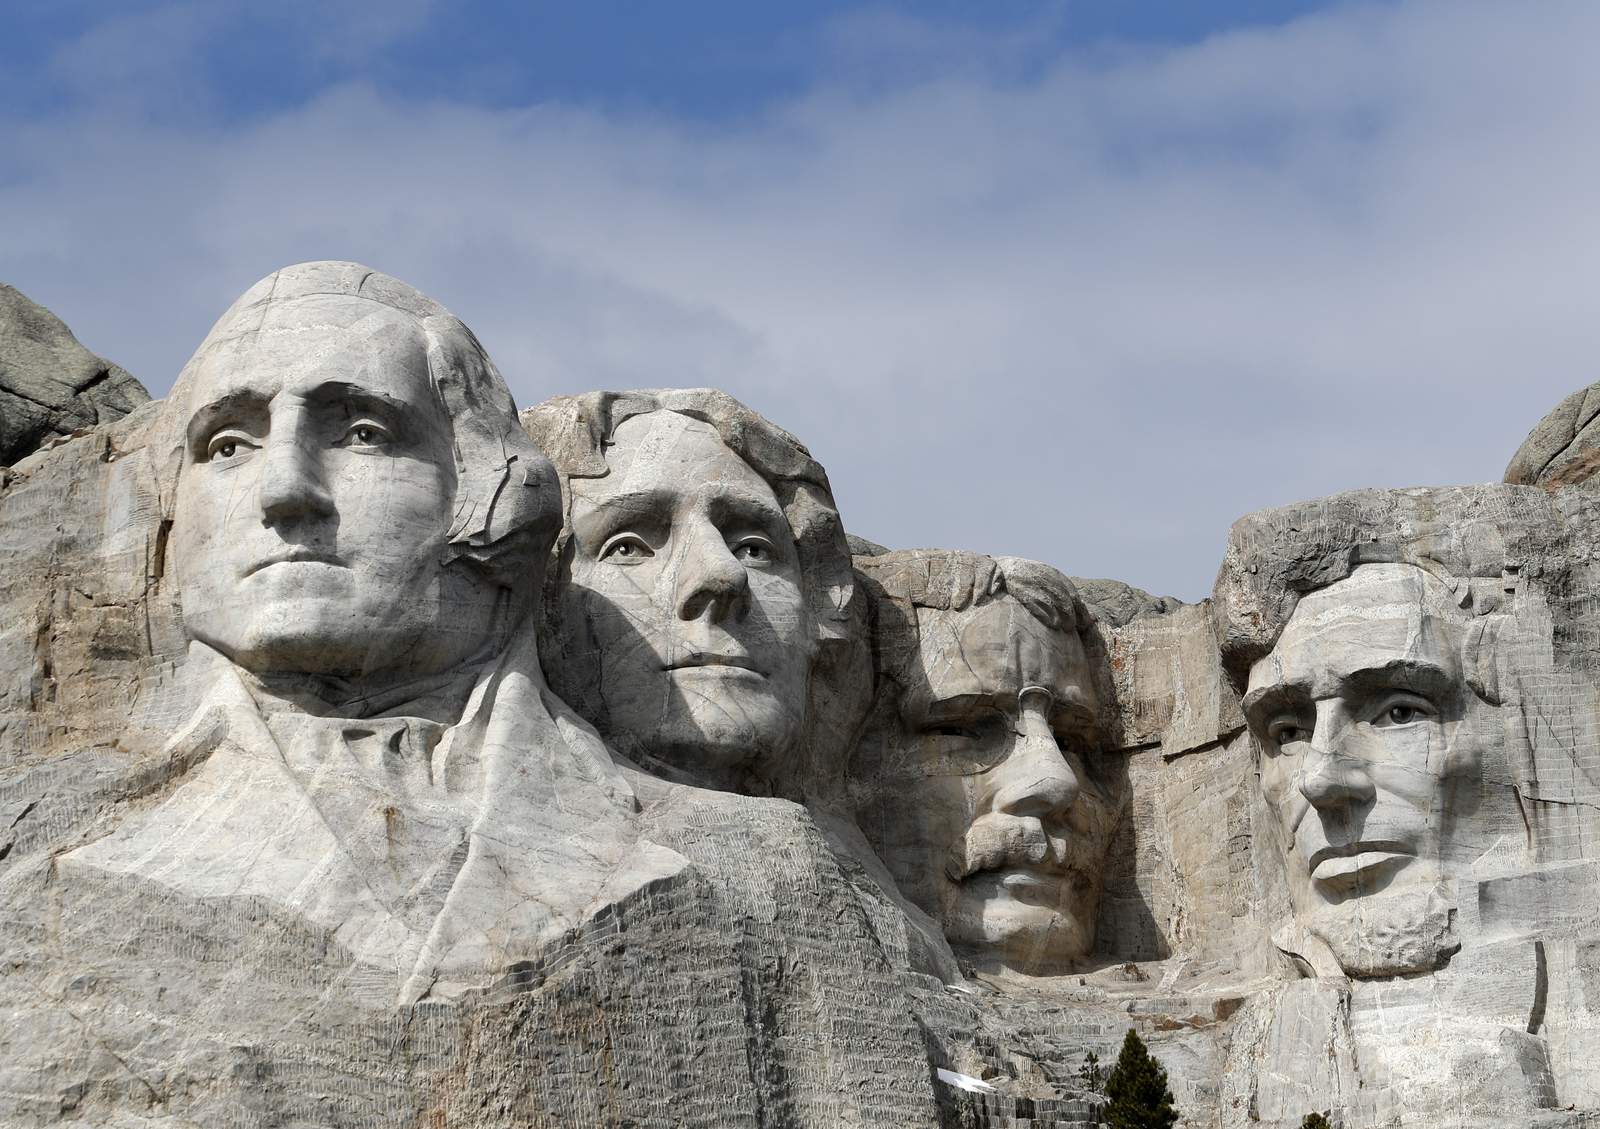 Trump's Rushmore trip draws real and figurative fireworks